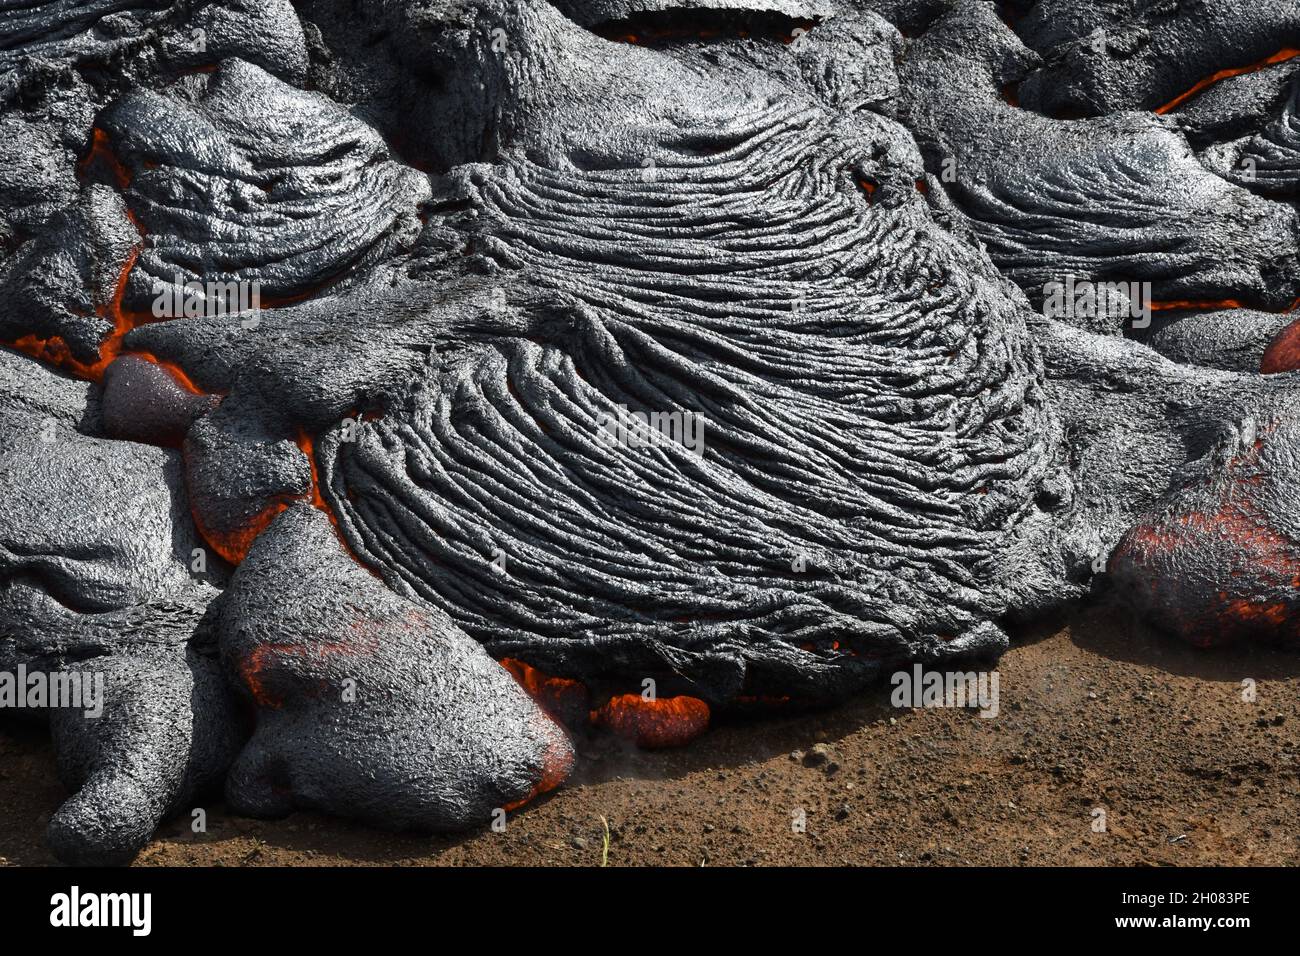 Pahoehoe lava flow at Fagradalsfjall, Iceland. Lava crust is gray and black, molten lava is red and orange. New ropy lava lobe forming. Stock Photo